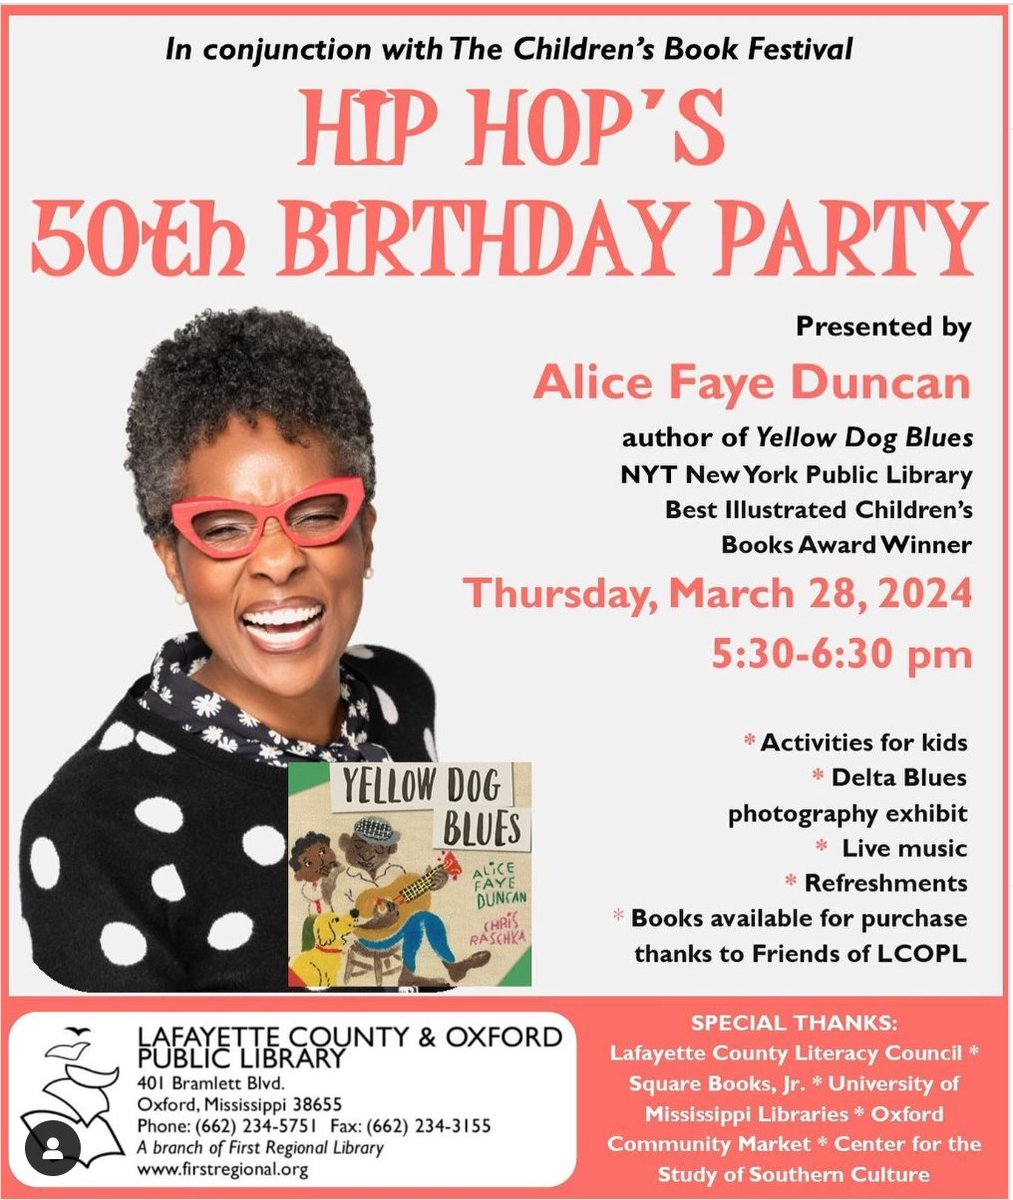 Do you know folks in Oxford, Mississippi? Please invite them to my reading and celebration of Black Music at the Public Library on Thursday, March 28th from 5:30 - 6:30. alicefayeduncan.com